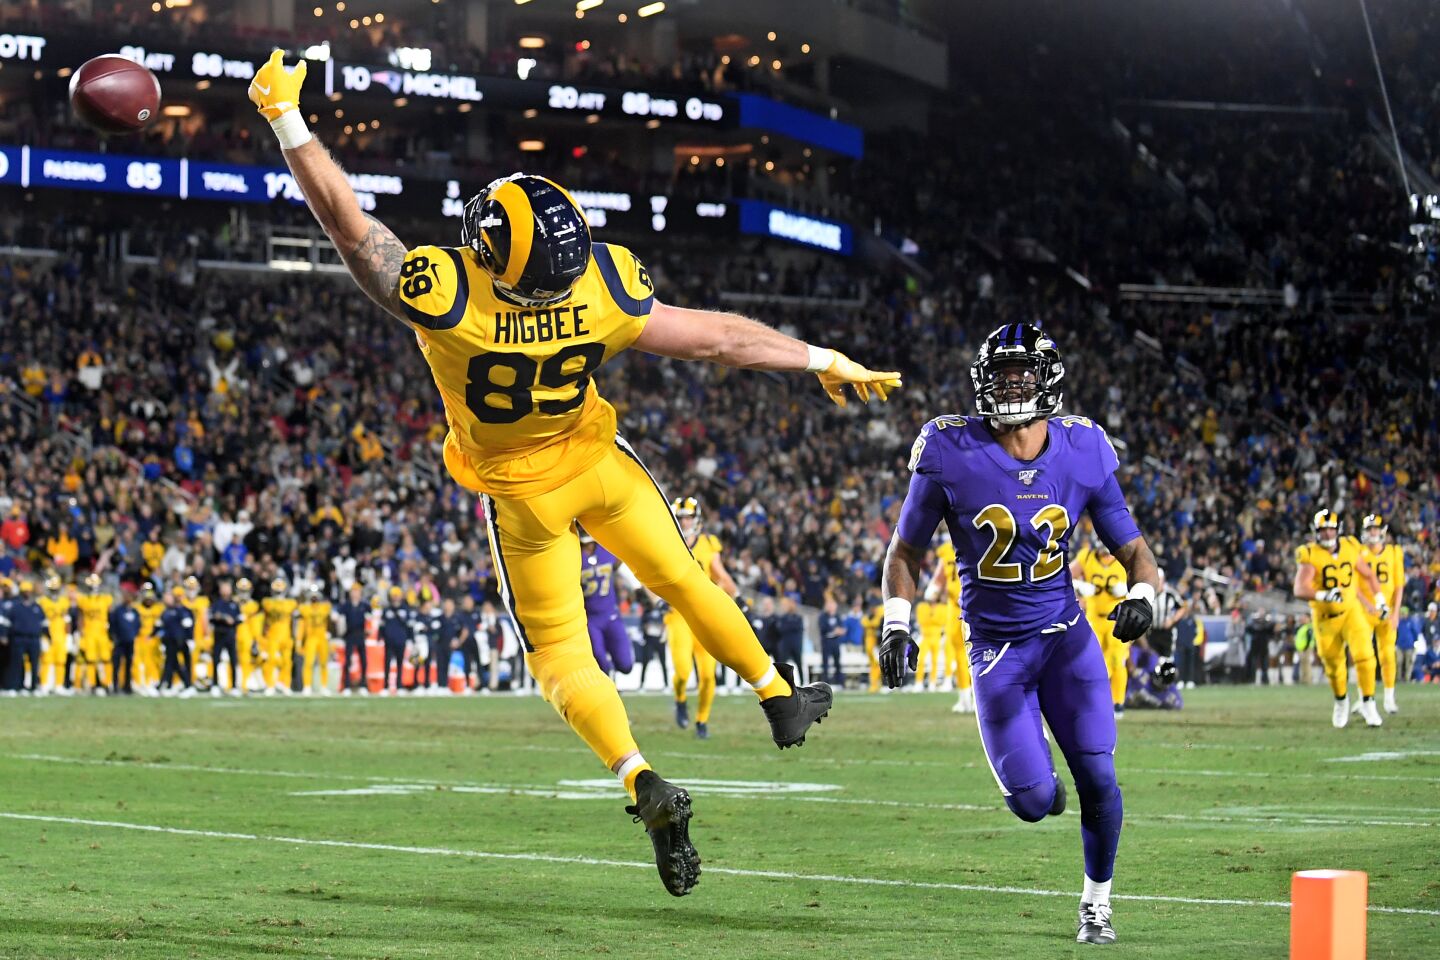 Rams tight end Tyler Higbee can't make the catch in the end zone in front of Ravens cornerback Jimmy Smith during the second quarter of a game Nov. 25 at the Coliseum.